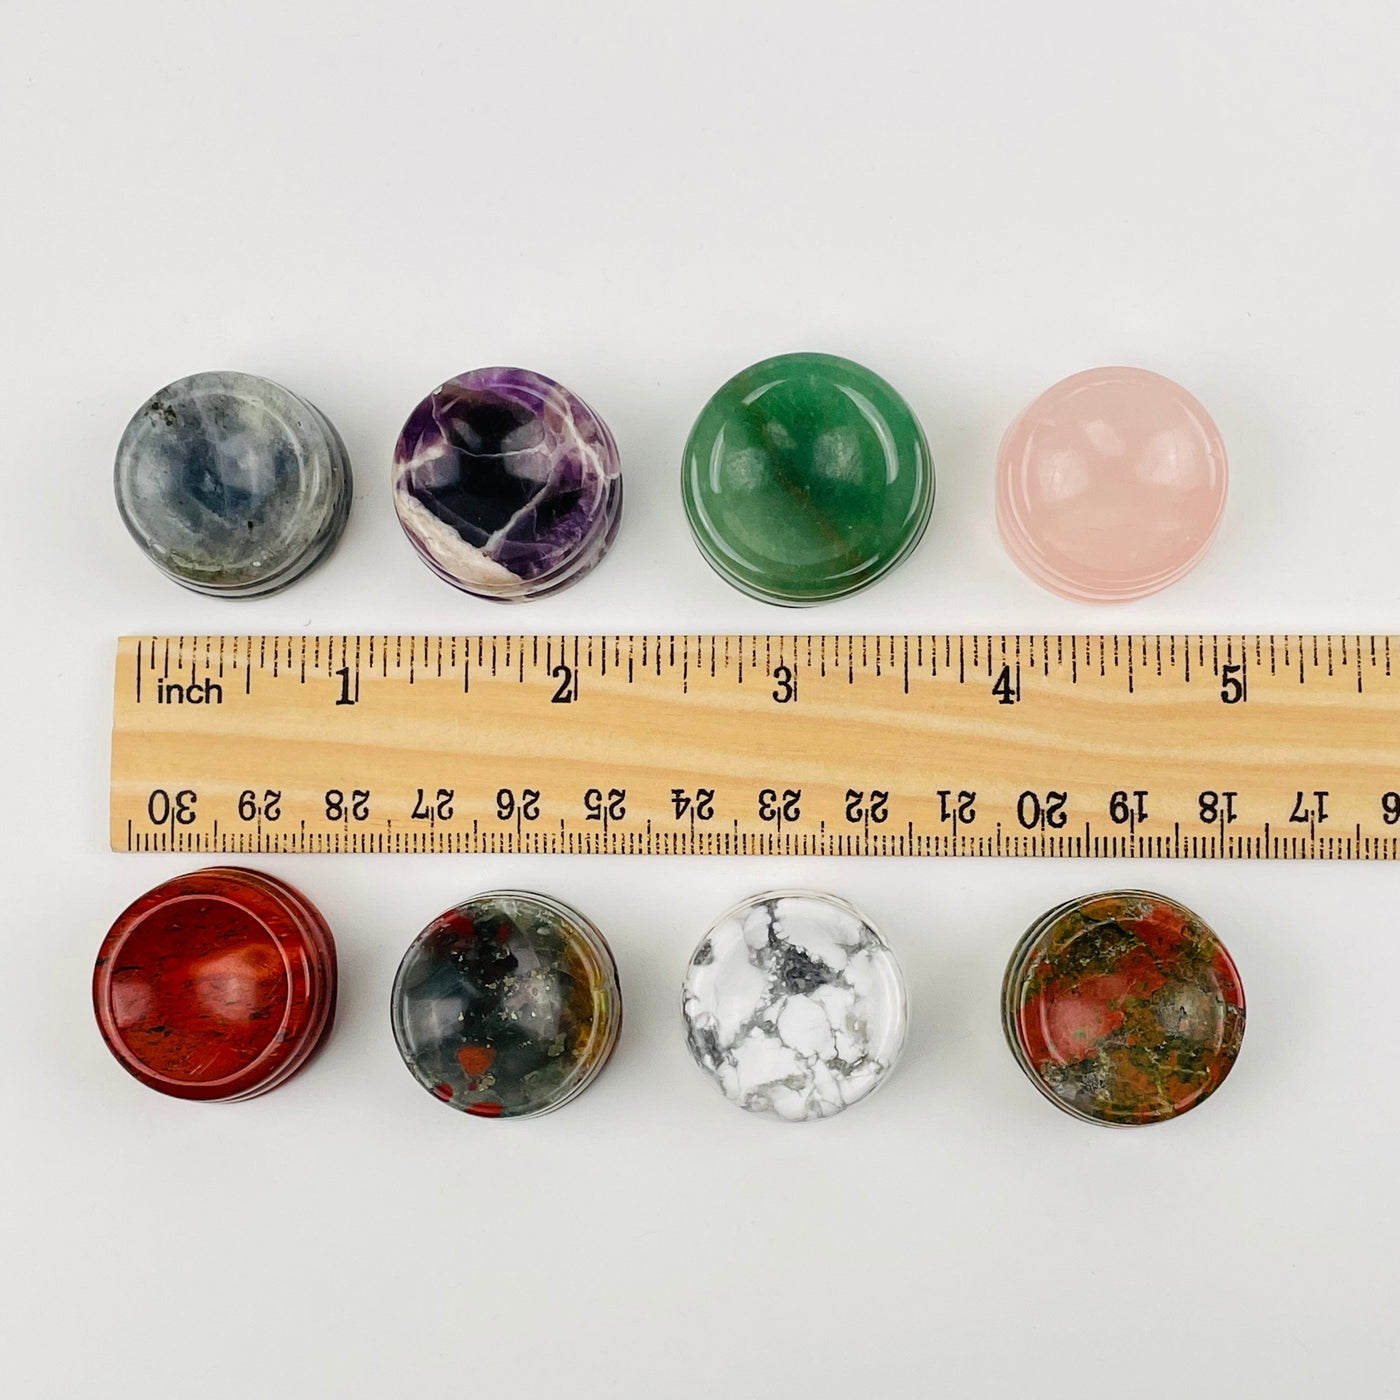 crystal sphere holders next to a ruler for size reference 